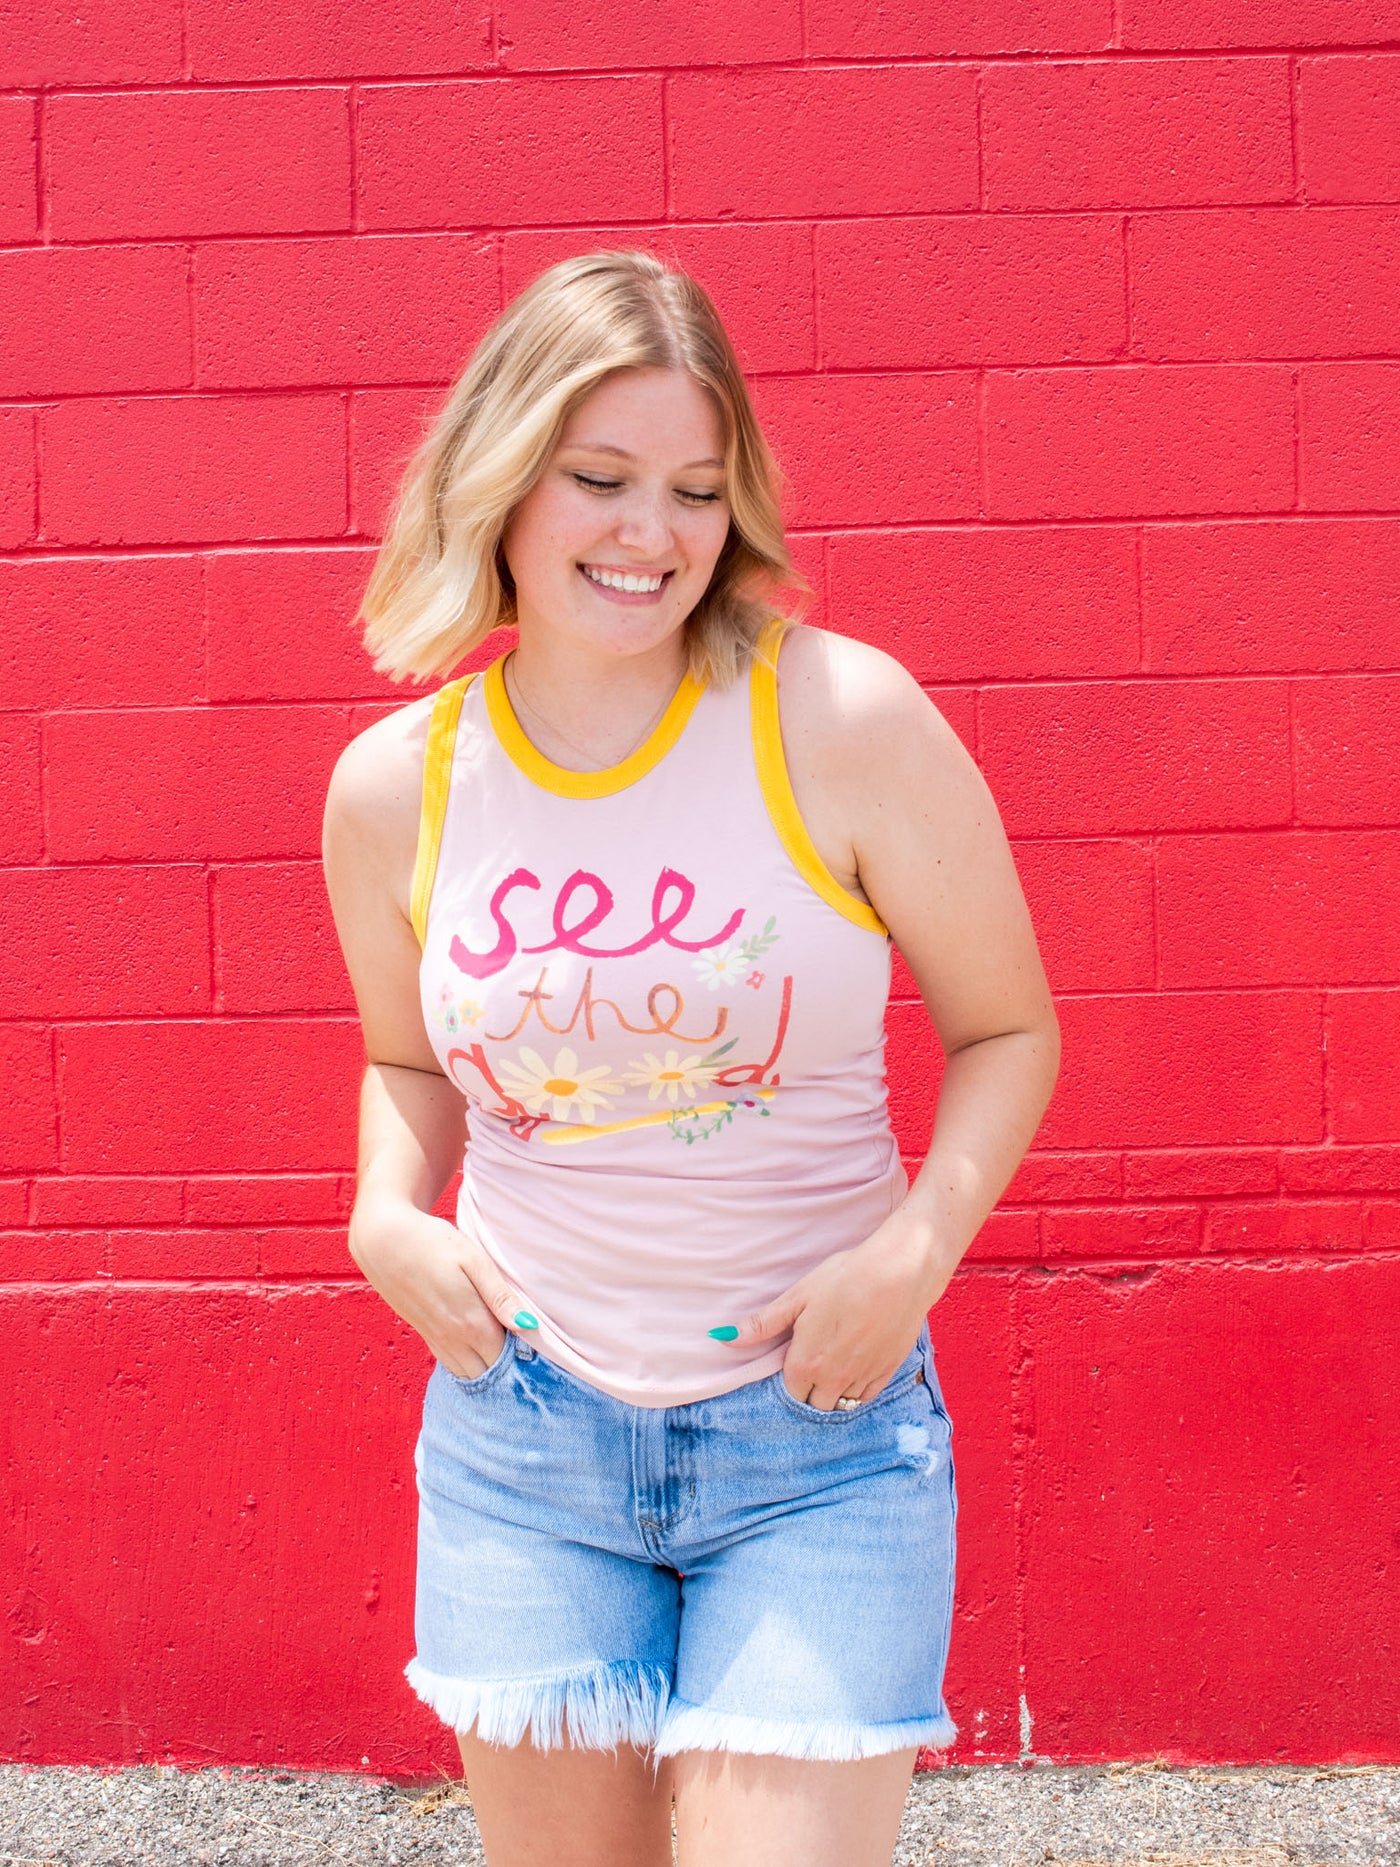 A model wearing a graphic pink tank which says "see the good" with contrasting borders. She has it paired with a pair of frayed denim shorts.